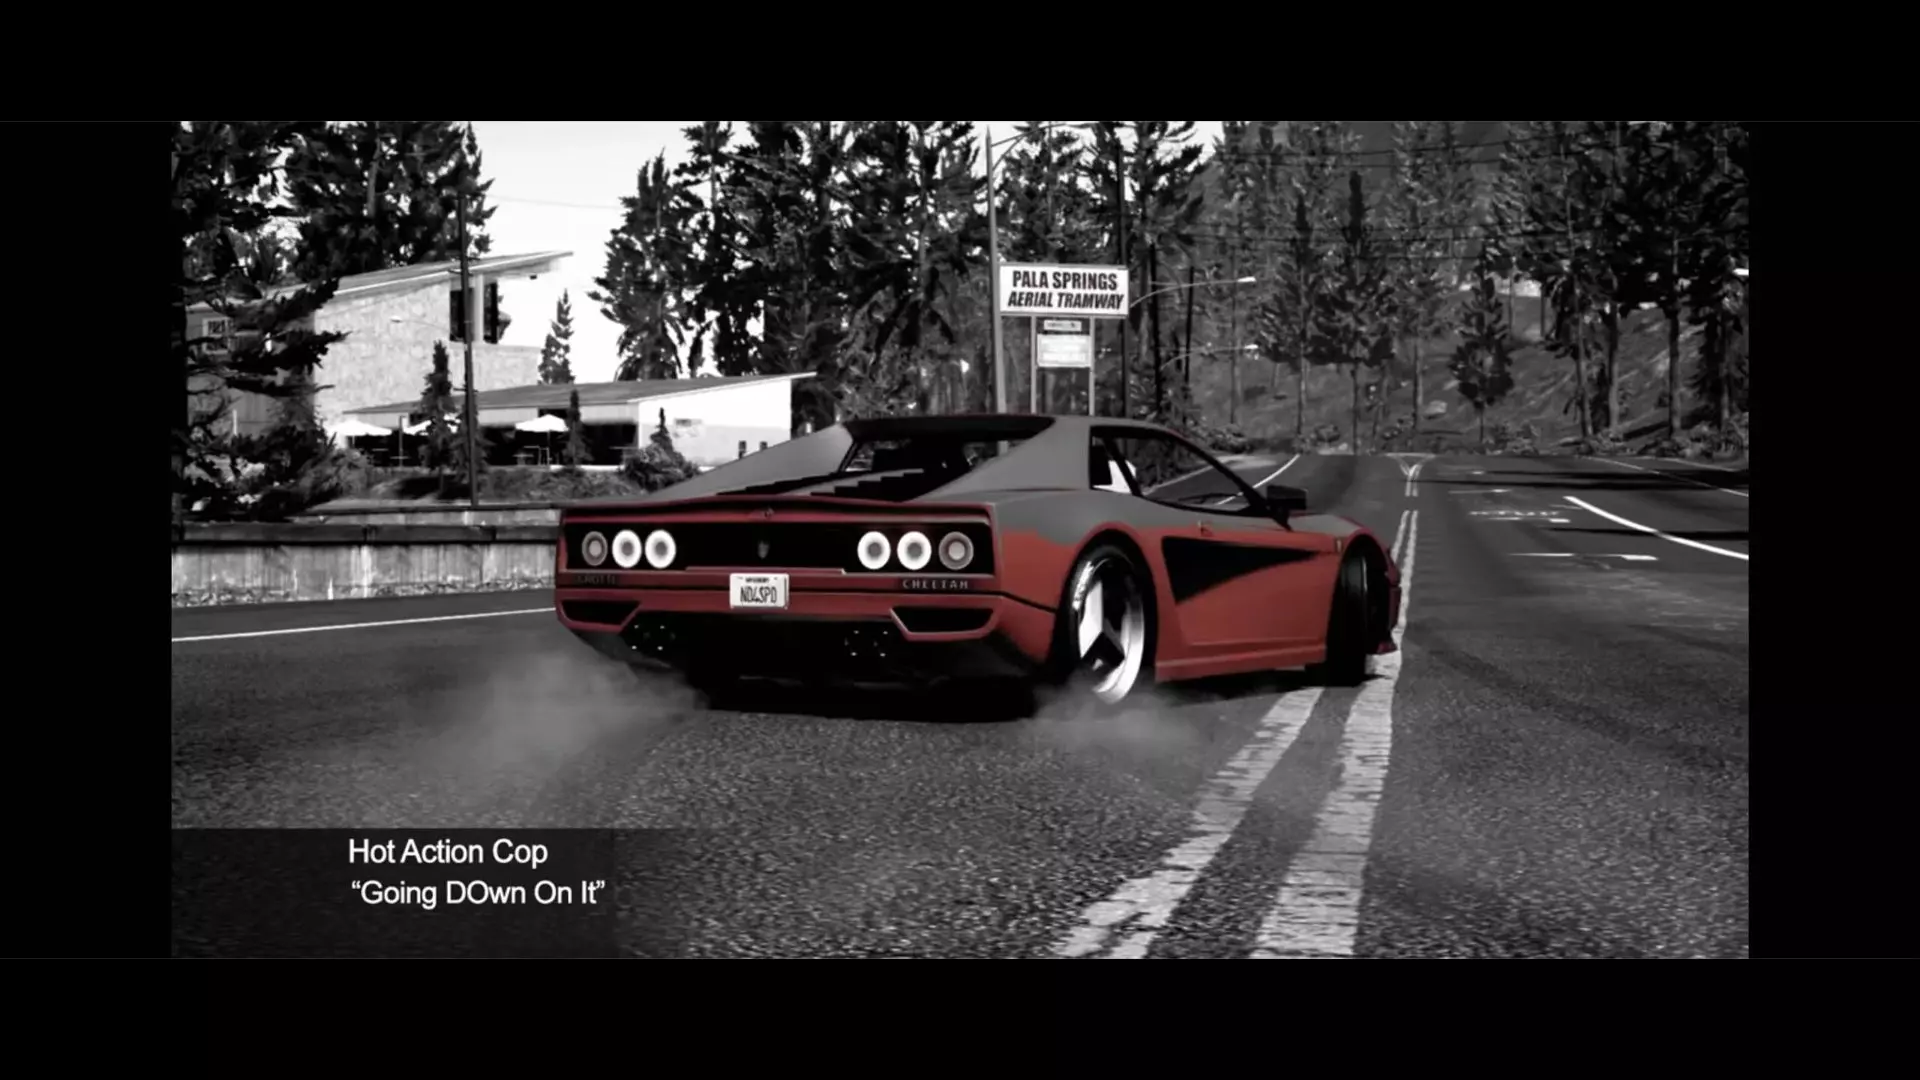 RavenwestR1 Pays Tribute to the Video Games That Made Me Love Cars | Autance